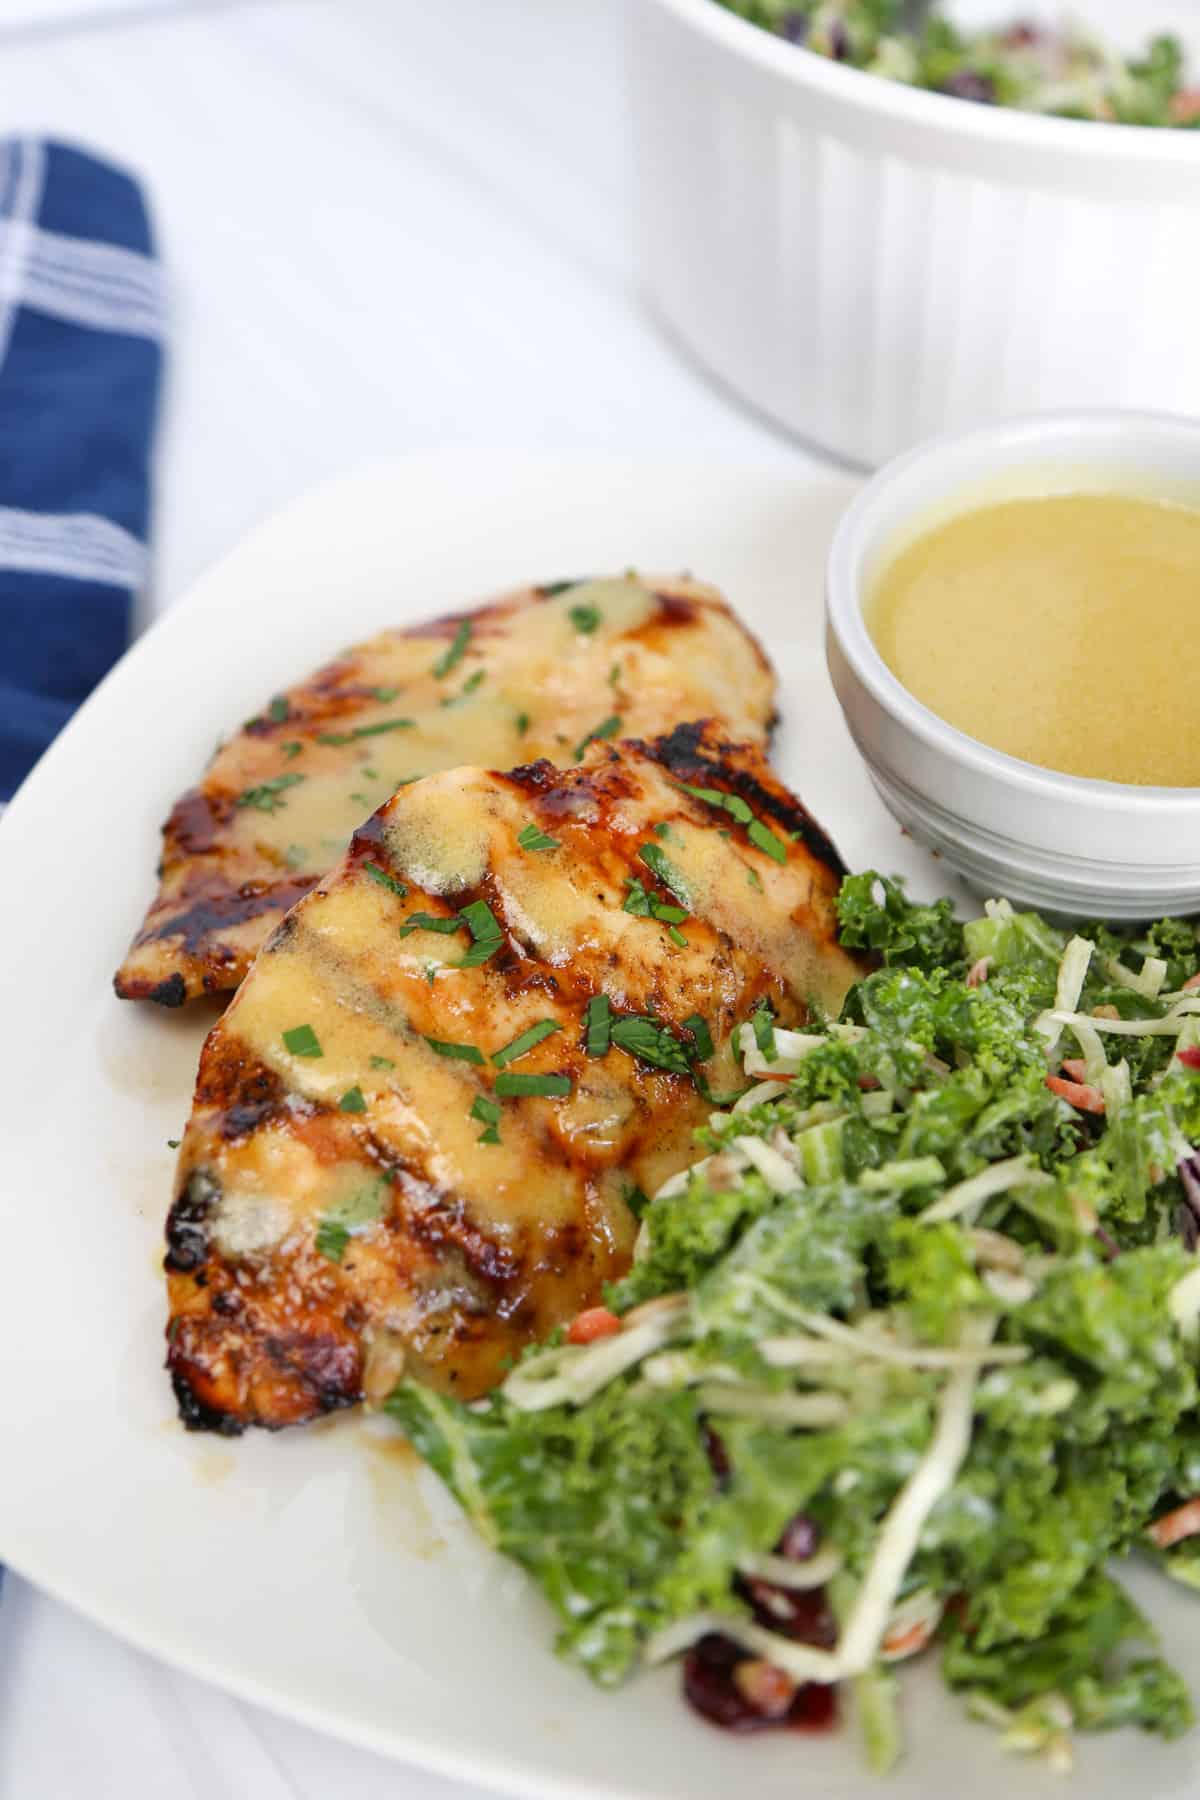 Grilled honey mustard chicken on a plate with salad and honey mustard sauce on the side.